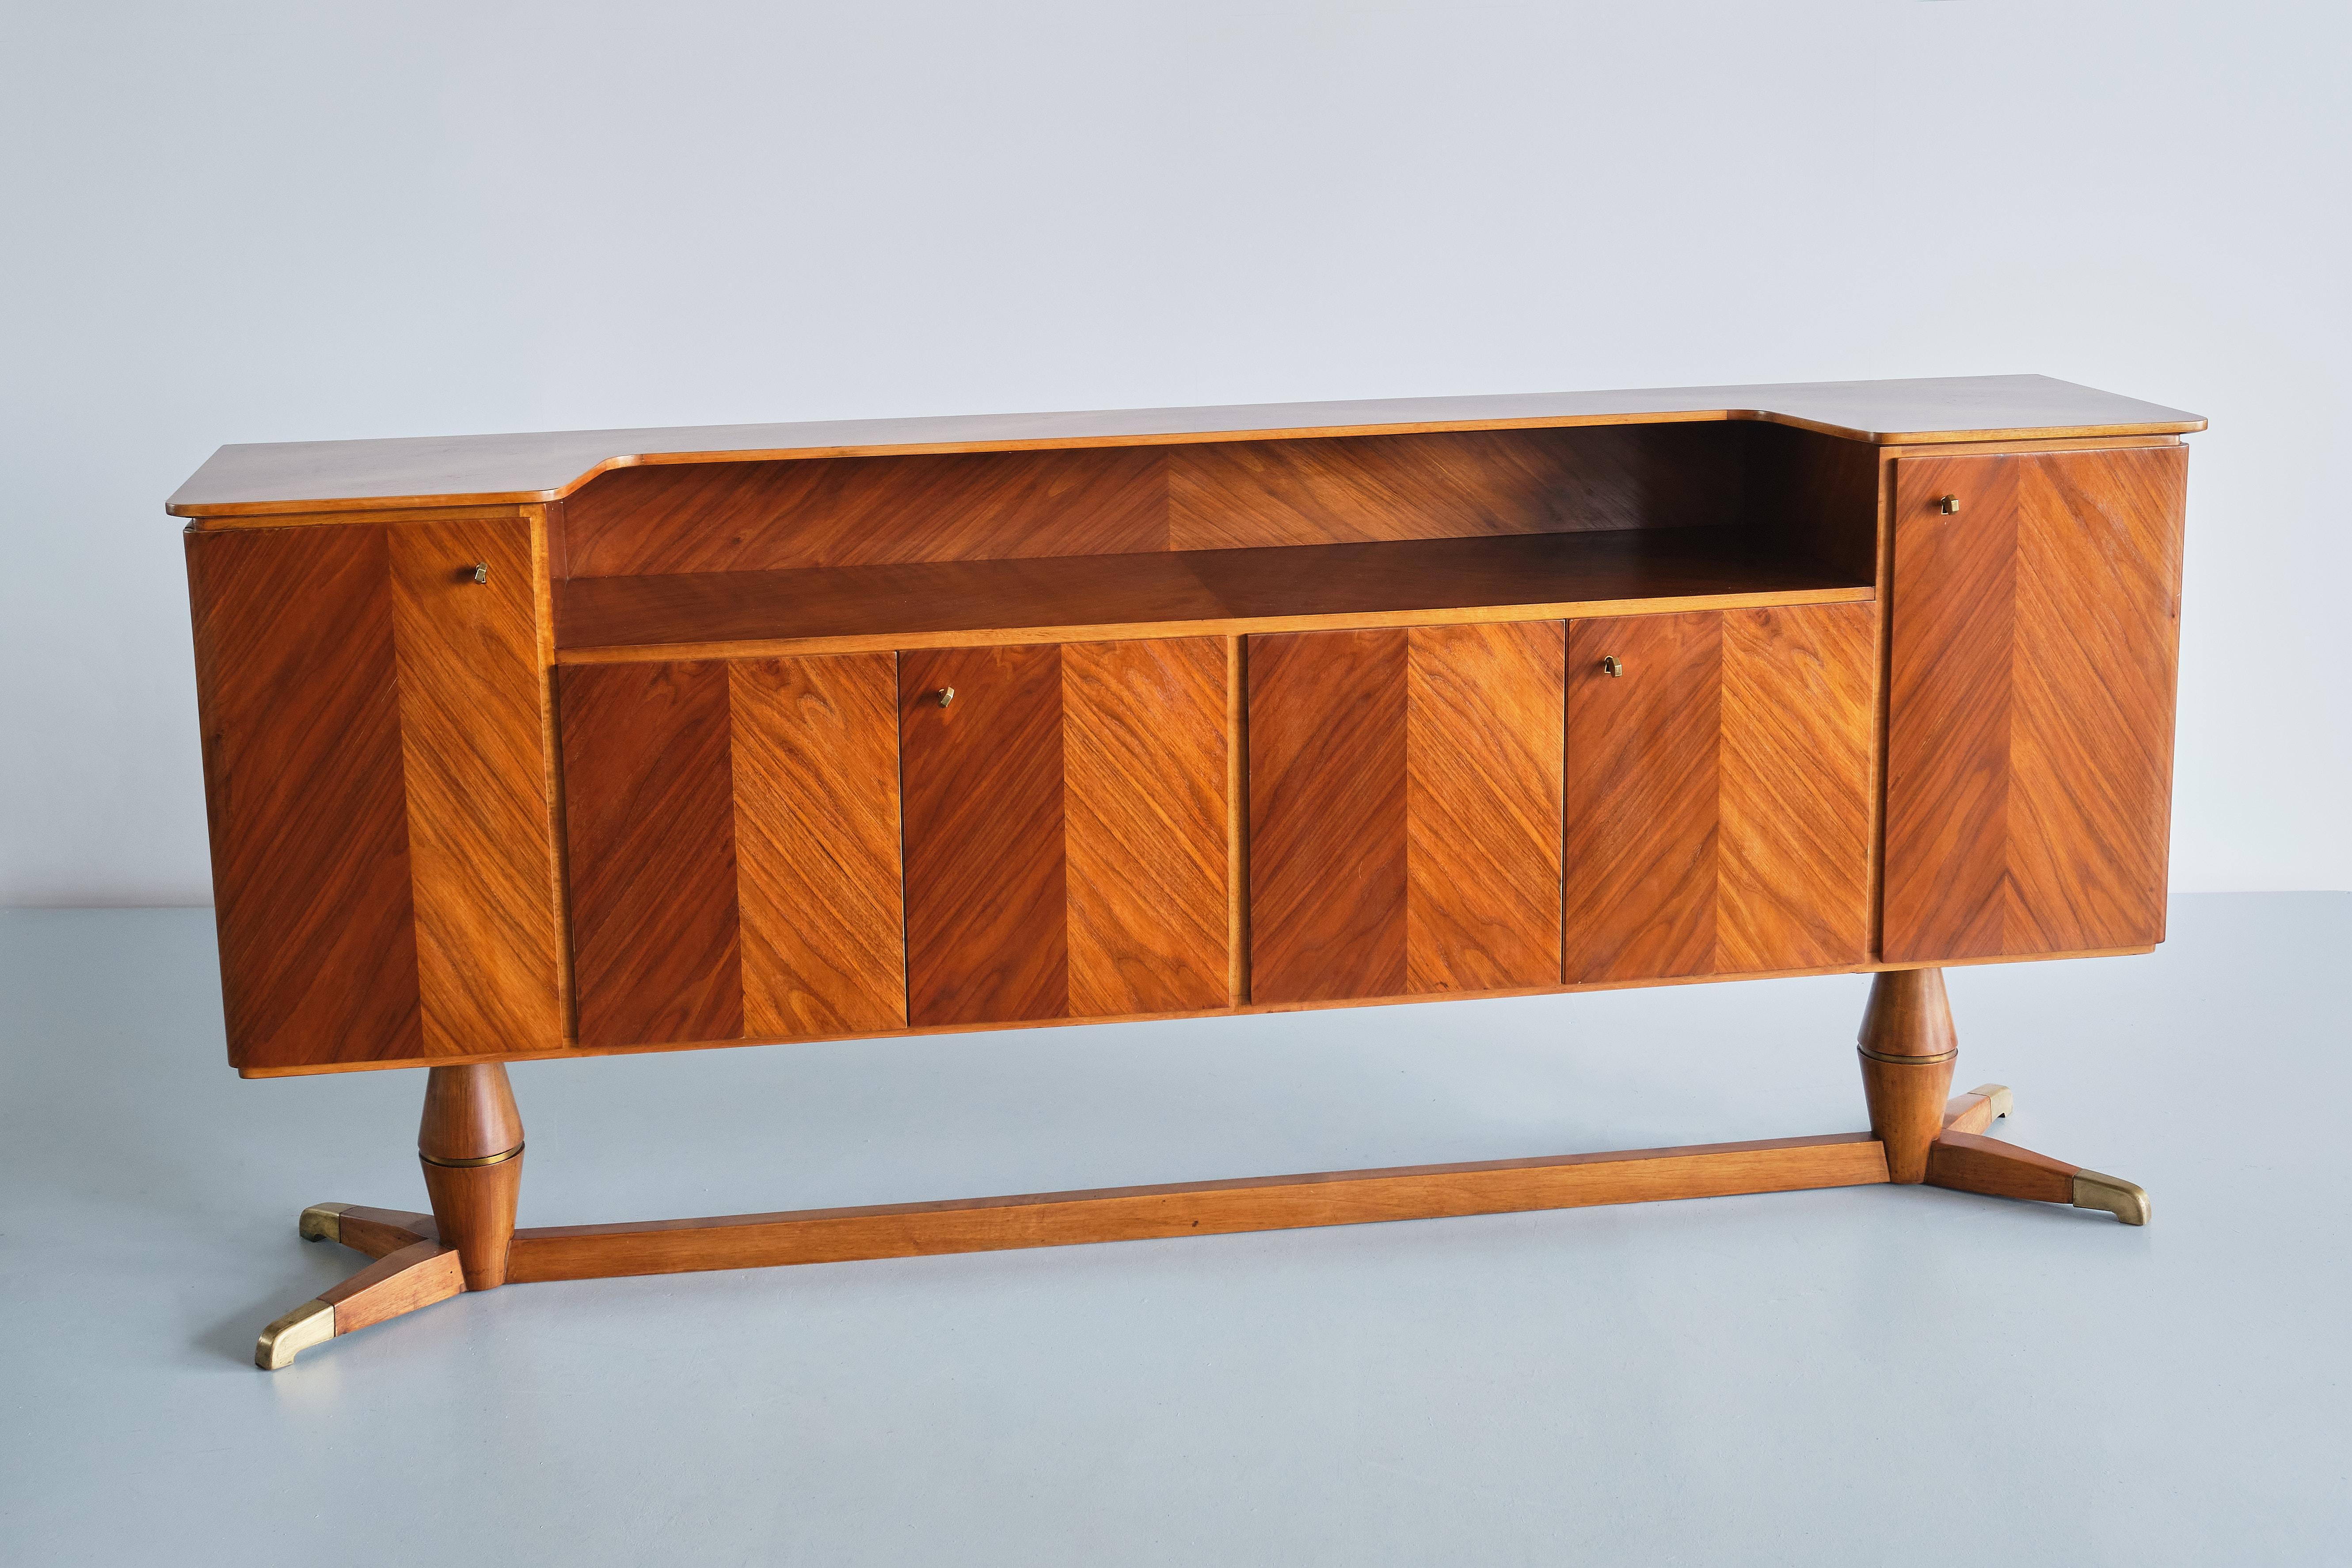 Mid-Century Modern Paolo Buffa Attributed Sideboard in Walnut and Brass, Serafino Arrighi, 1940s For Sale